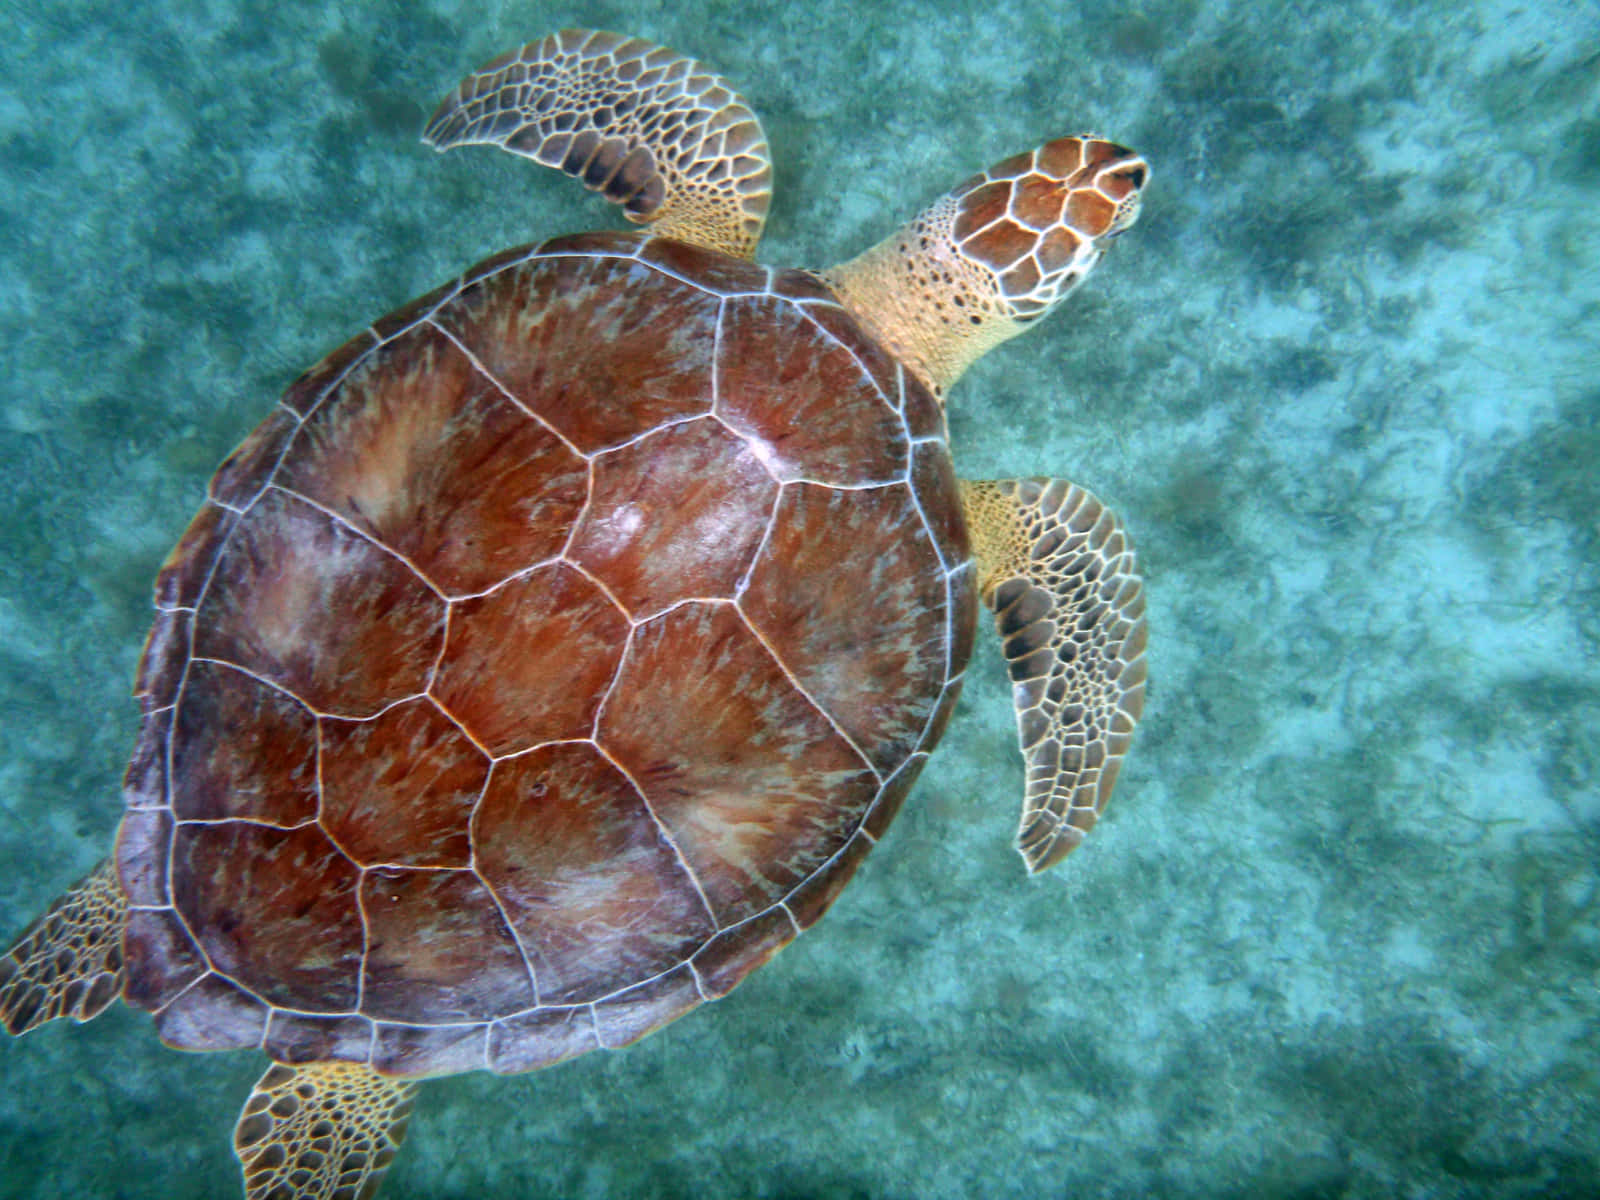 A graceful sea turtle swimming in the tropical ocean